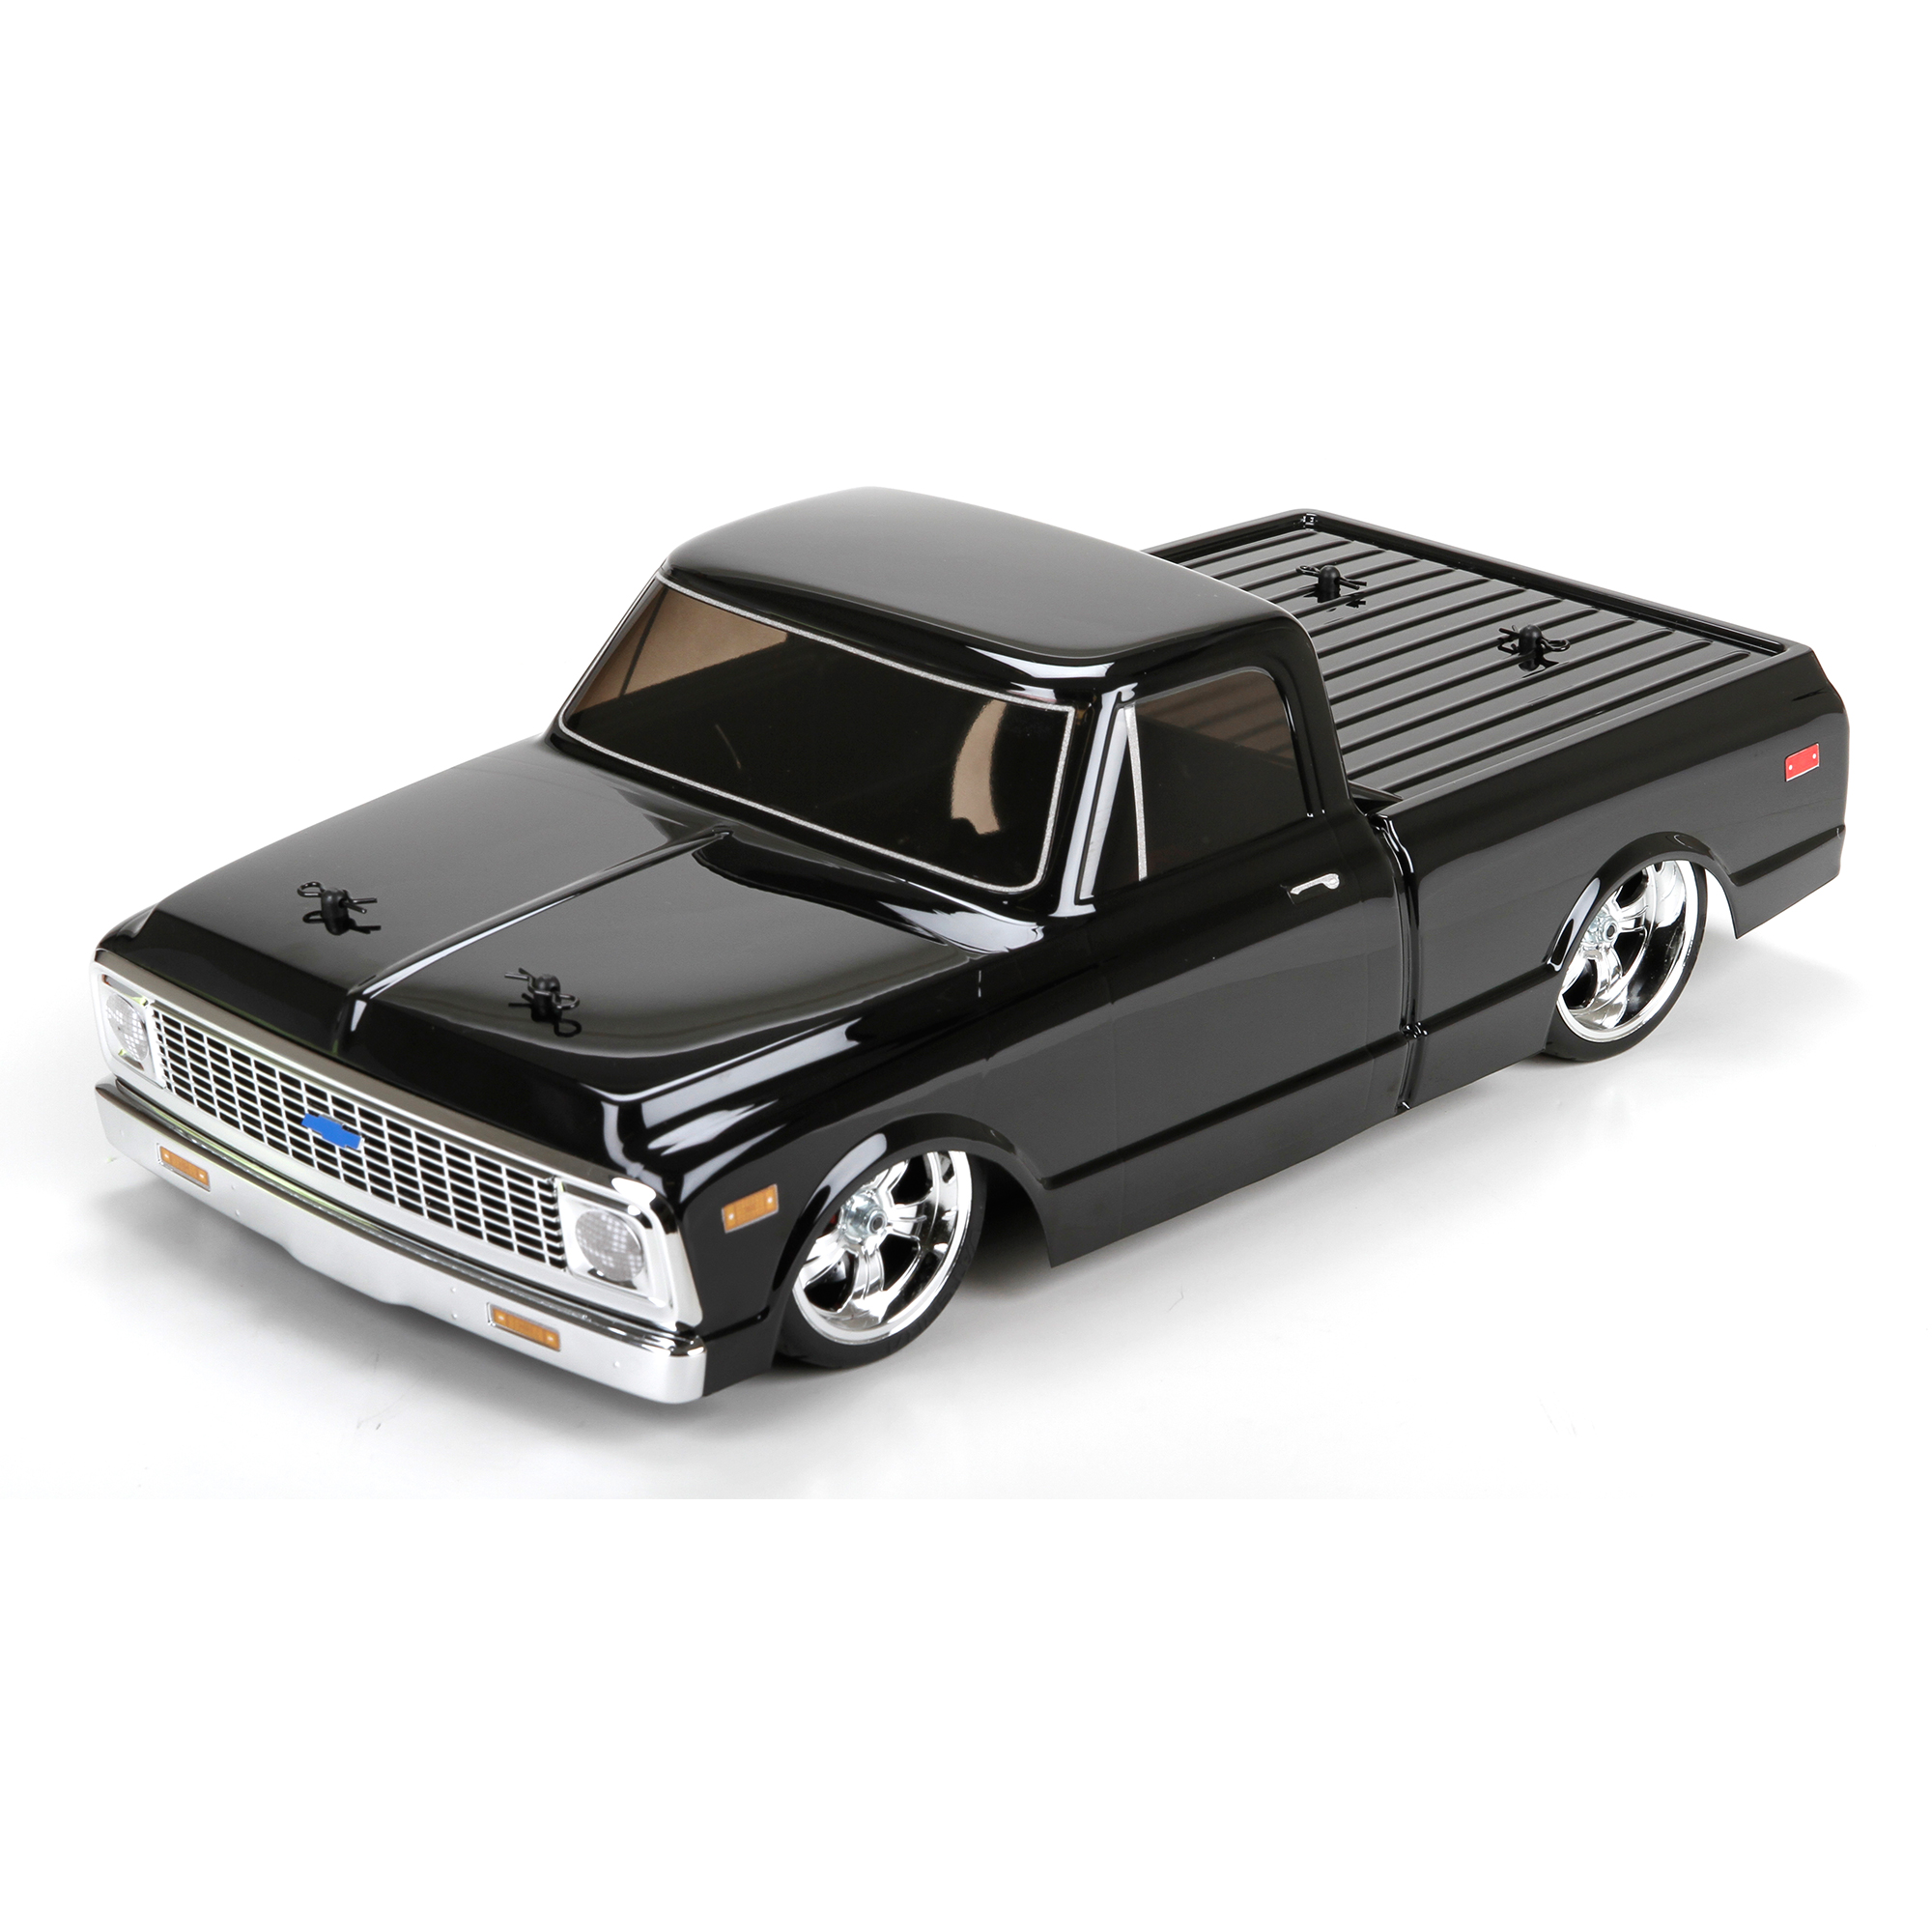 1/10 1972 Chevy C10 Pickup Truck V-100 S 4WD Brushed RTR